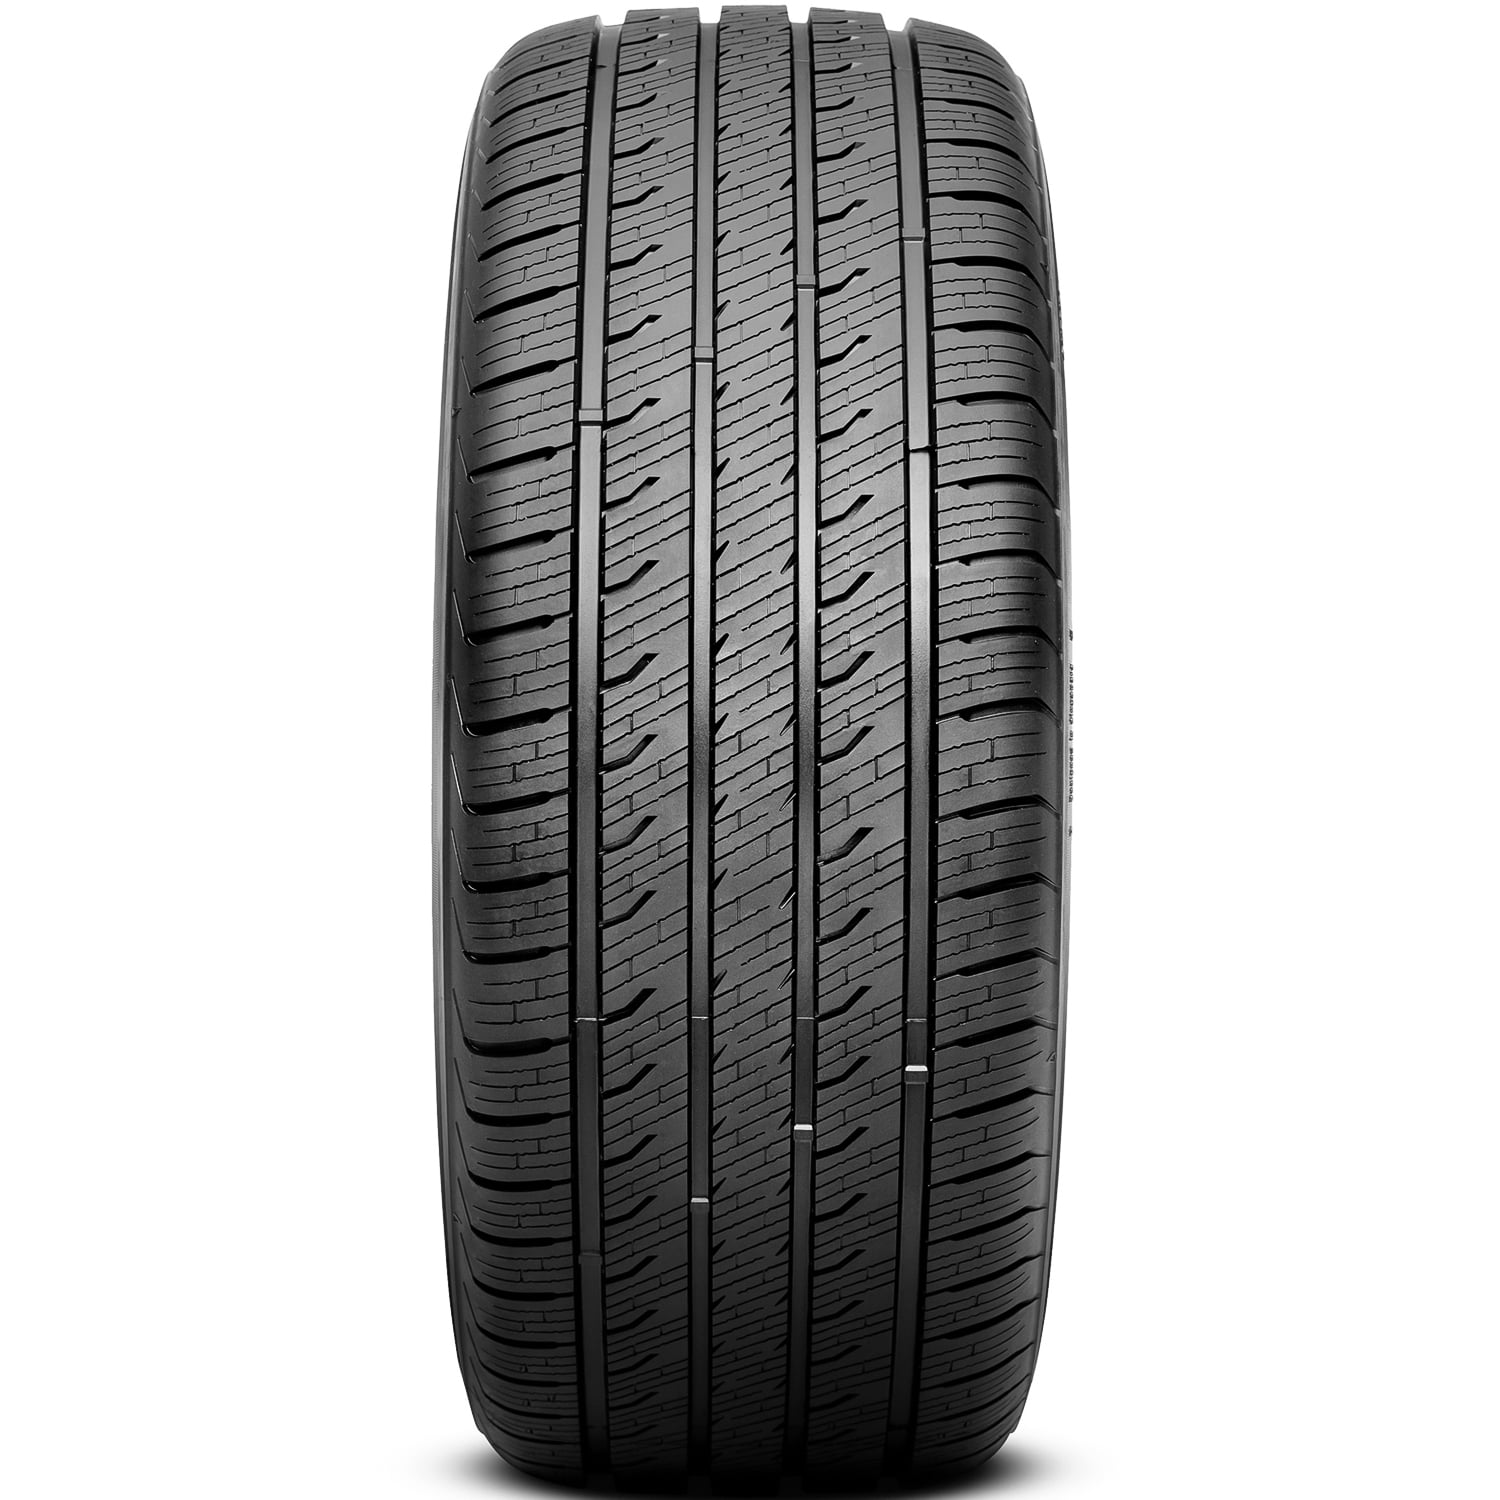 Patriot Tires RB-1 Touring Radial Tire 225/45ZR18 95W